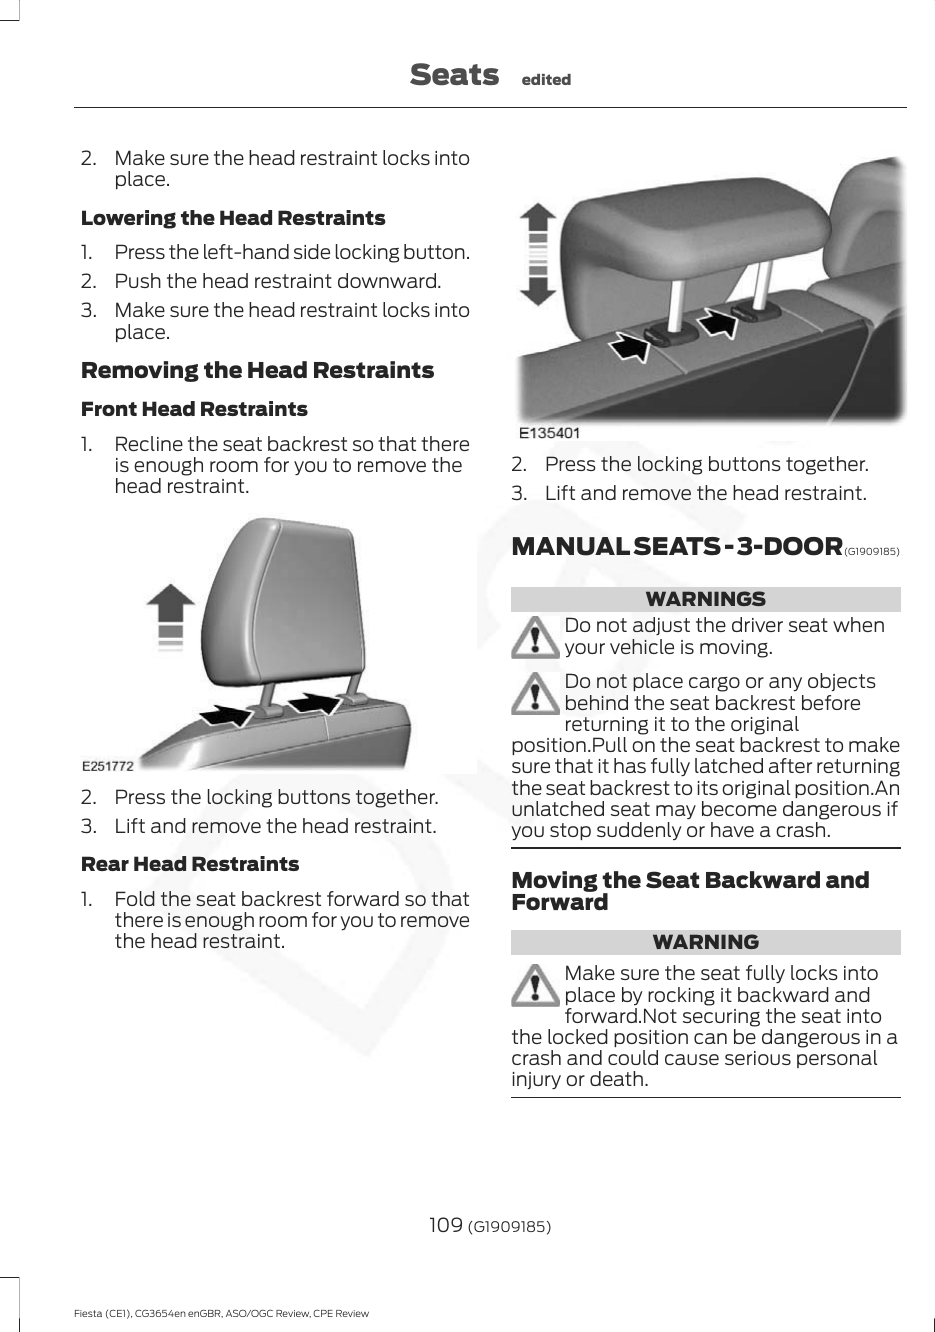 2. Make sure the head restraint locks intoplace.Lowering the Head Restraints1. Press the left-hand side locking button.2. Push the head restraint downward.3. Make sure the head restraint locks intoplace.Removing the Head RestraintsFront Head Restraints1. Recline the seat backrest so that thereis enough room for you to remove thehead restraint.2. Press the locking buttons together.3. Lift and remove the head restraint.Rear Head Restraints1. Fold the seat backrest forward so thatthere is enough room for you to removethe head restraint.2. Press the locking buttons together.3. Lift and remove the head restraint.MANUAL SEATS - 3-DOOR (G19091 8 5)WARNINGSDo not adjust the driver seat whenyour vehicle is moving.Do not place cargo or any objectsbehind the seat backrest beforereturning it to the originalposition.Pull on the seat backrest to makesure that it has fully latched after returningthe seat backrest to its original position.Anunlatched seat may become dangerous ifyou stop suddenly or have a crash.Moving the Seat Backward andForwardWARNINGMake sure the seat fully locks intoplace by rocking it backward andforward.Not securing the seat intothe locked position can be dangerous in acrash and could cause serious personalinjury or death.109 (G1909185)Fiesta (CE1), CG3654en enGBR, ASO/OGC Review, CPE ReviewSeats edited